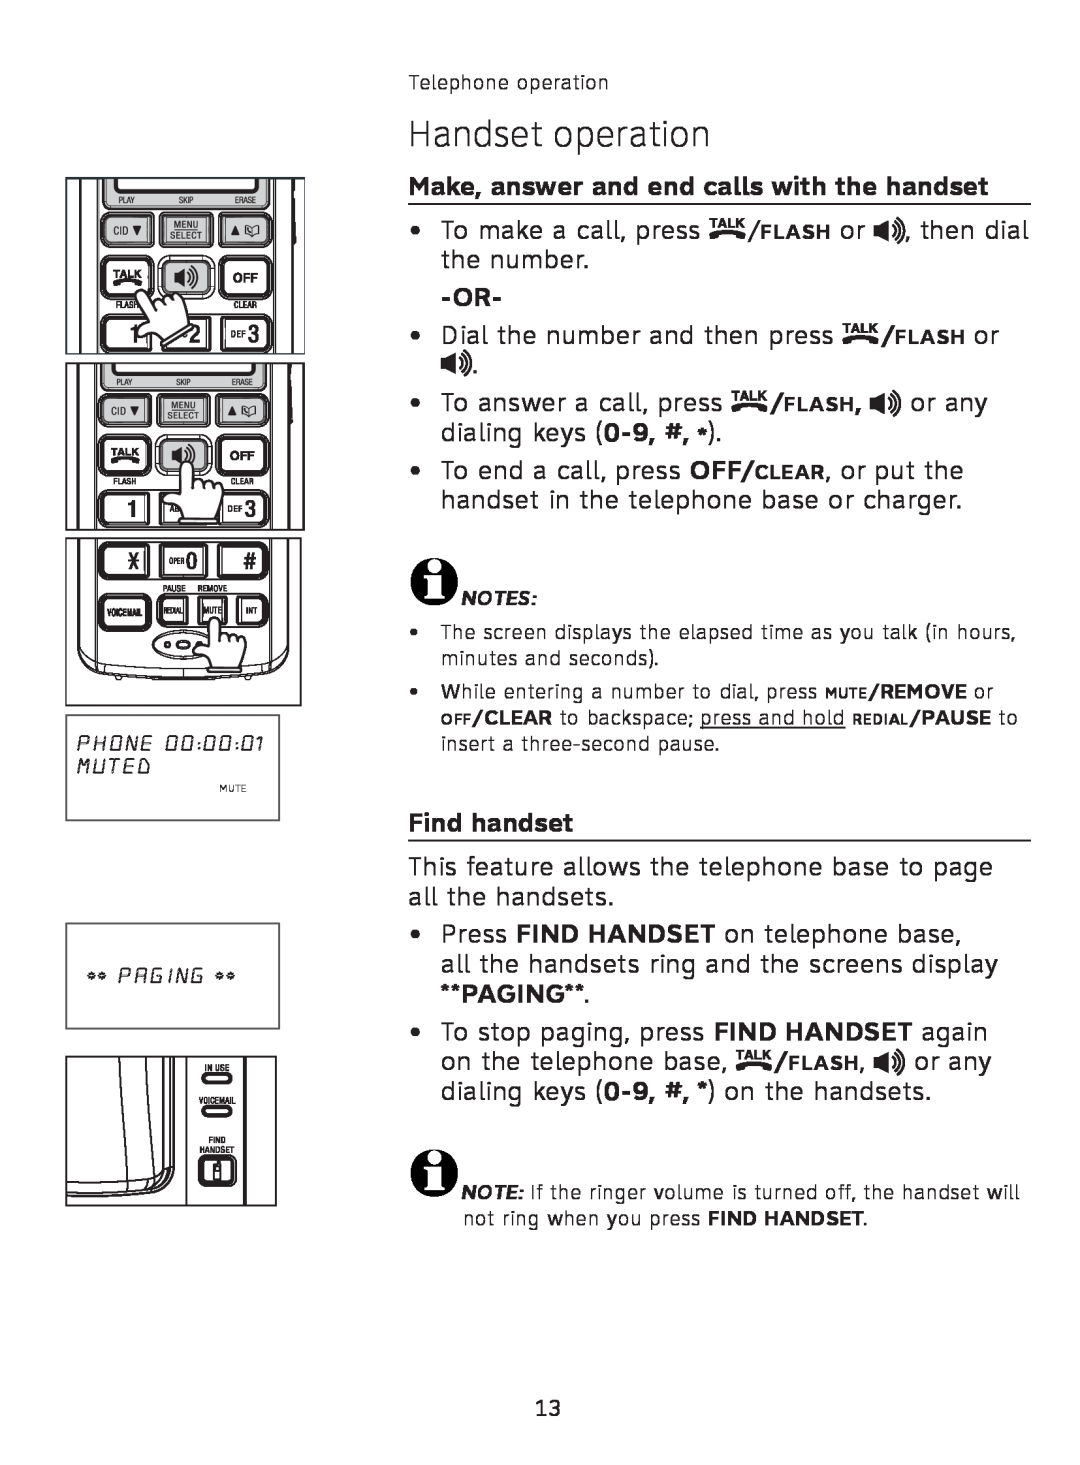 AT&T AT3111-2 user manual Handset operation, Make, answer and end calls with the handset, Find handset 